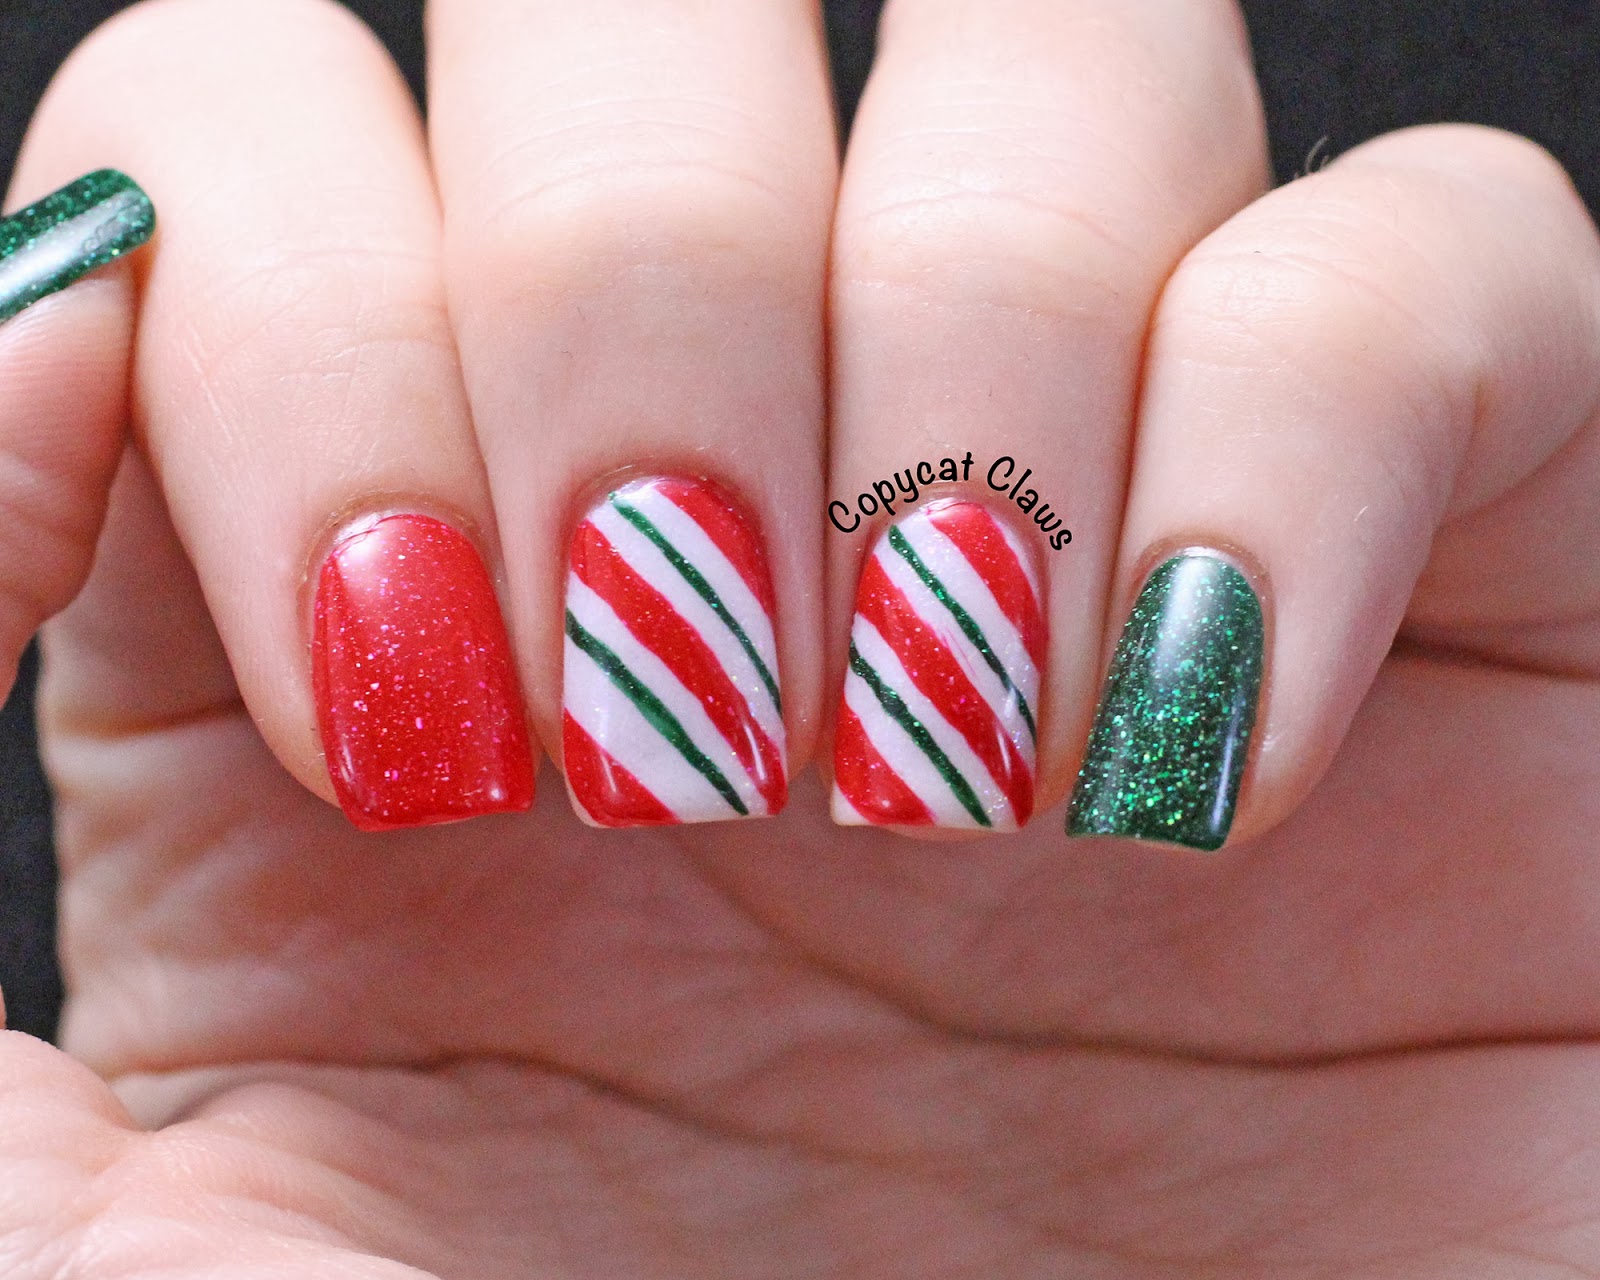 2. "Candy Cane" Nail Art - wide 3